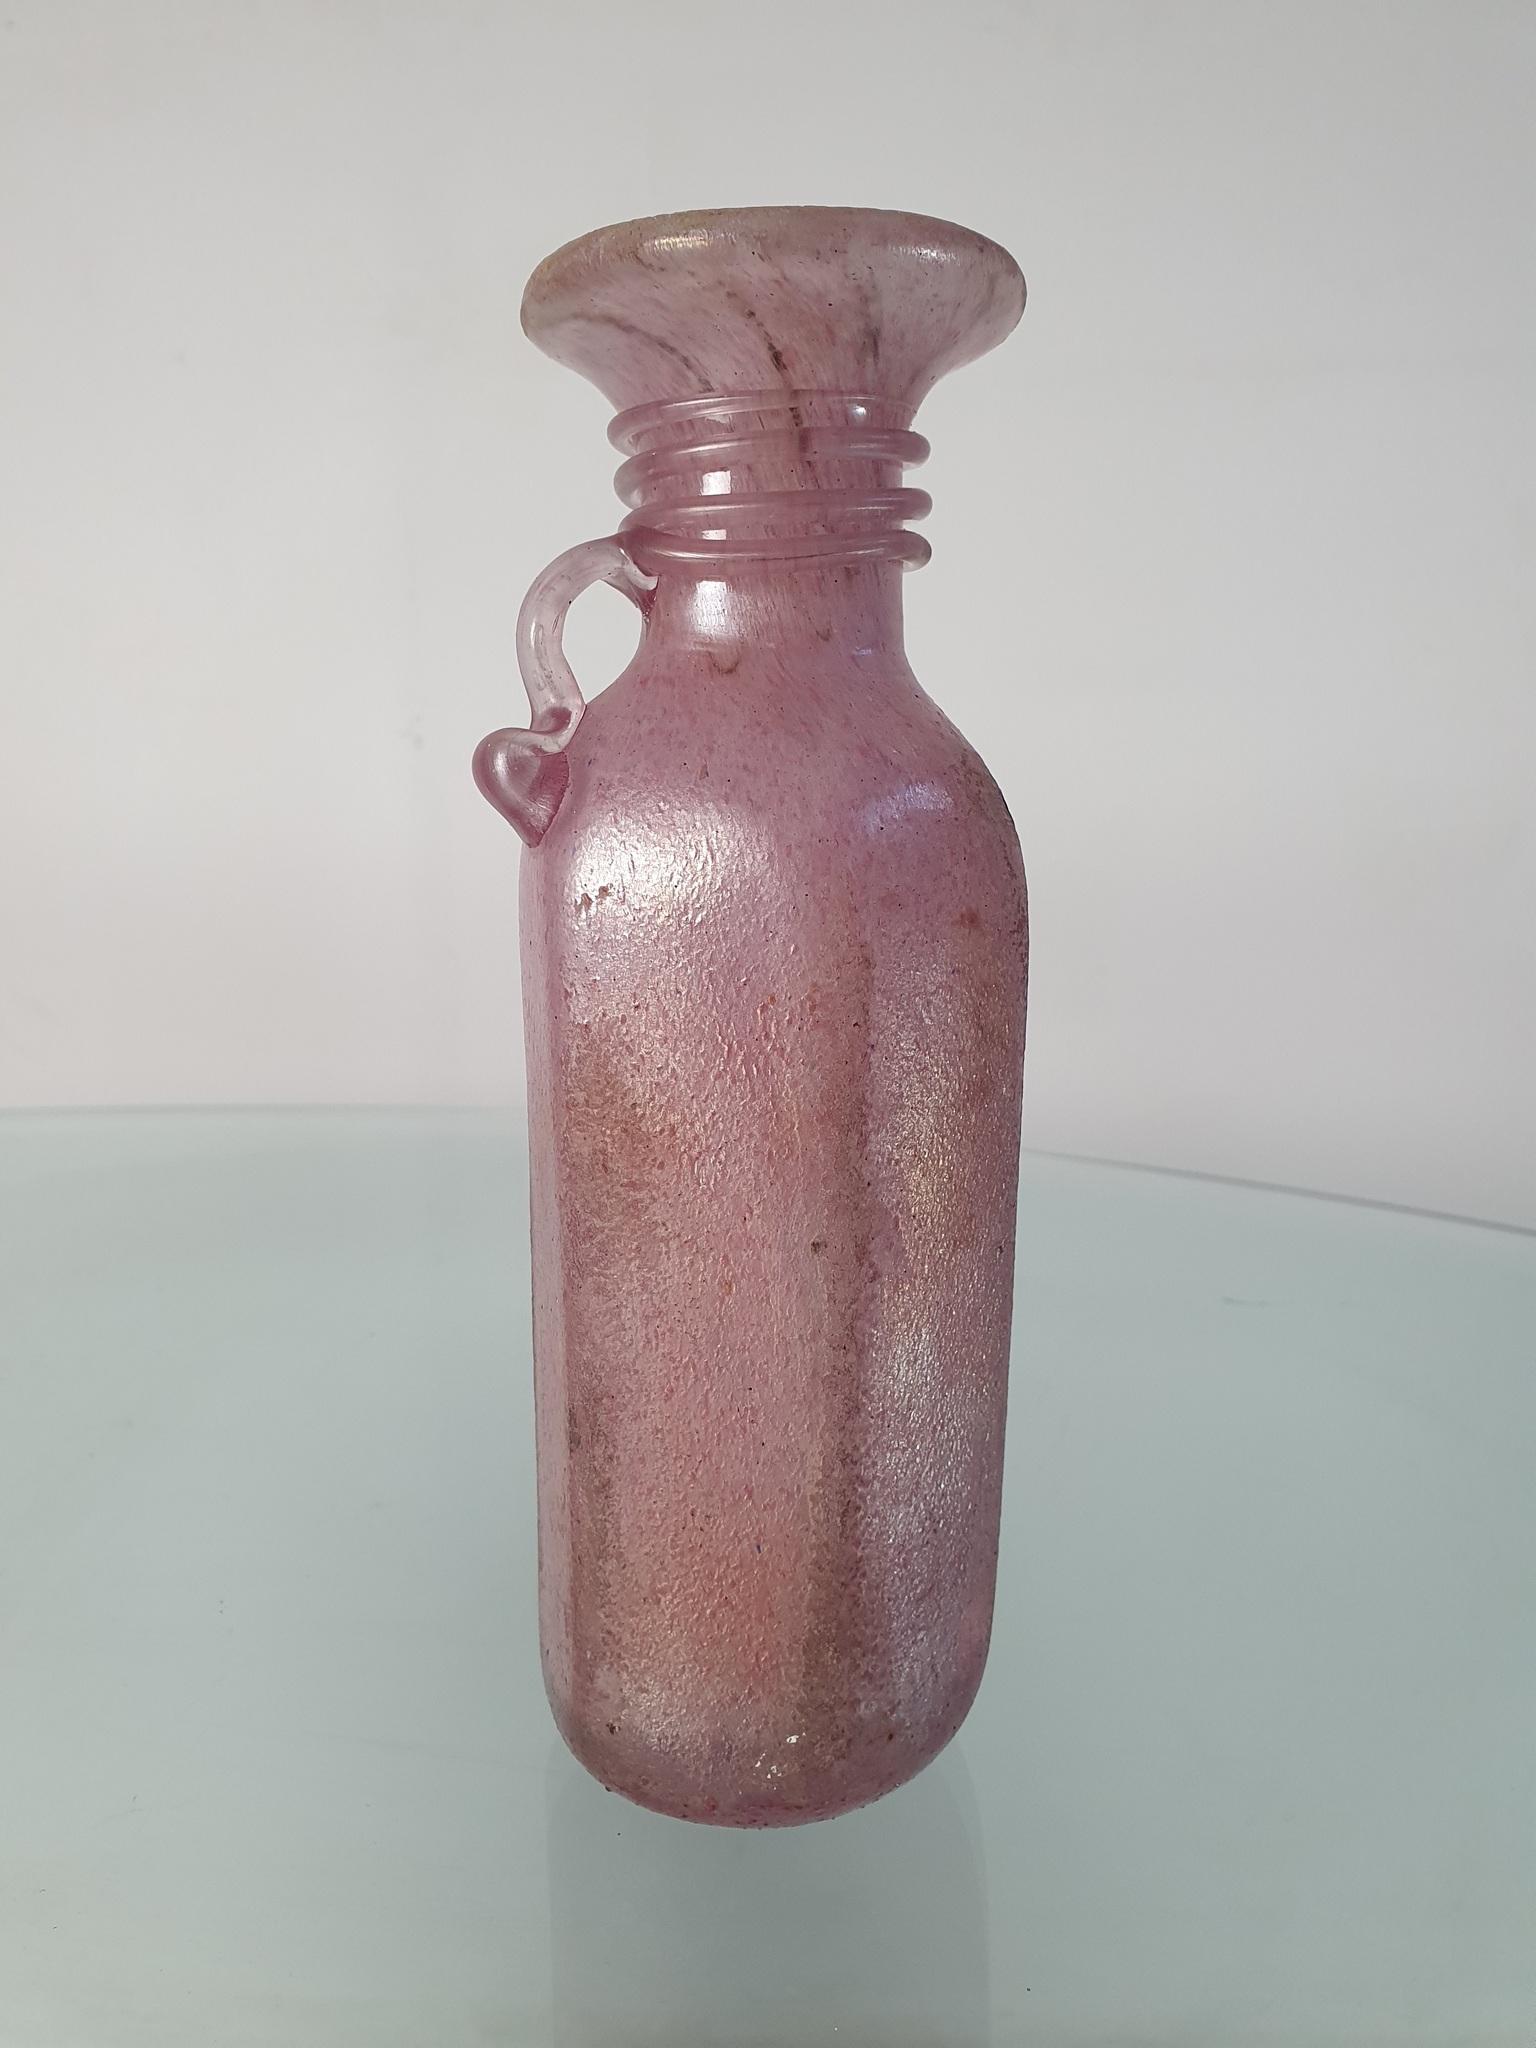 An iridescent pink vase in pink / mauve colored Murano glass attributed to famous glass artist Archimede Seguso

Archimede Seguso was an Italian glass manufacturer known for his intricate glass vases, necklaces, and sculptures. Spanning a wide